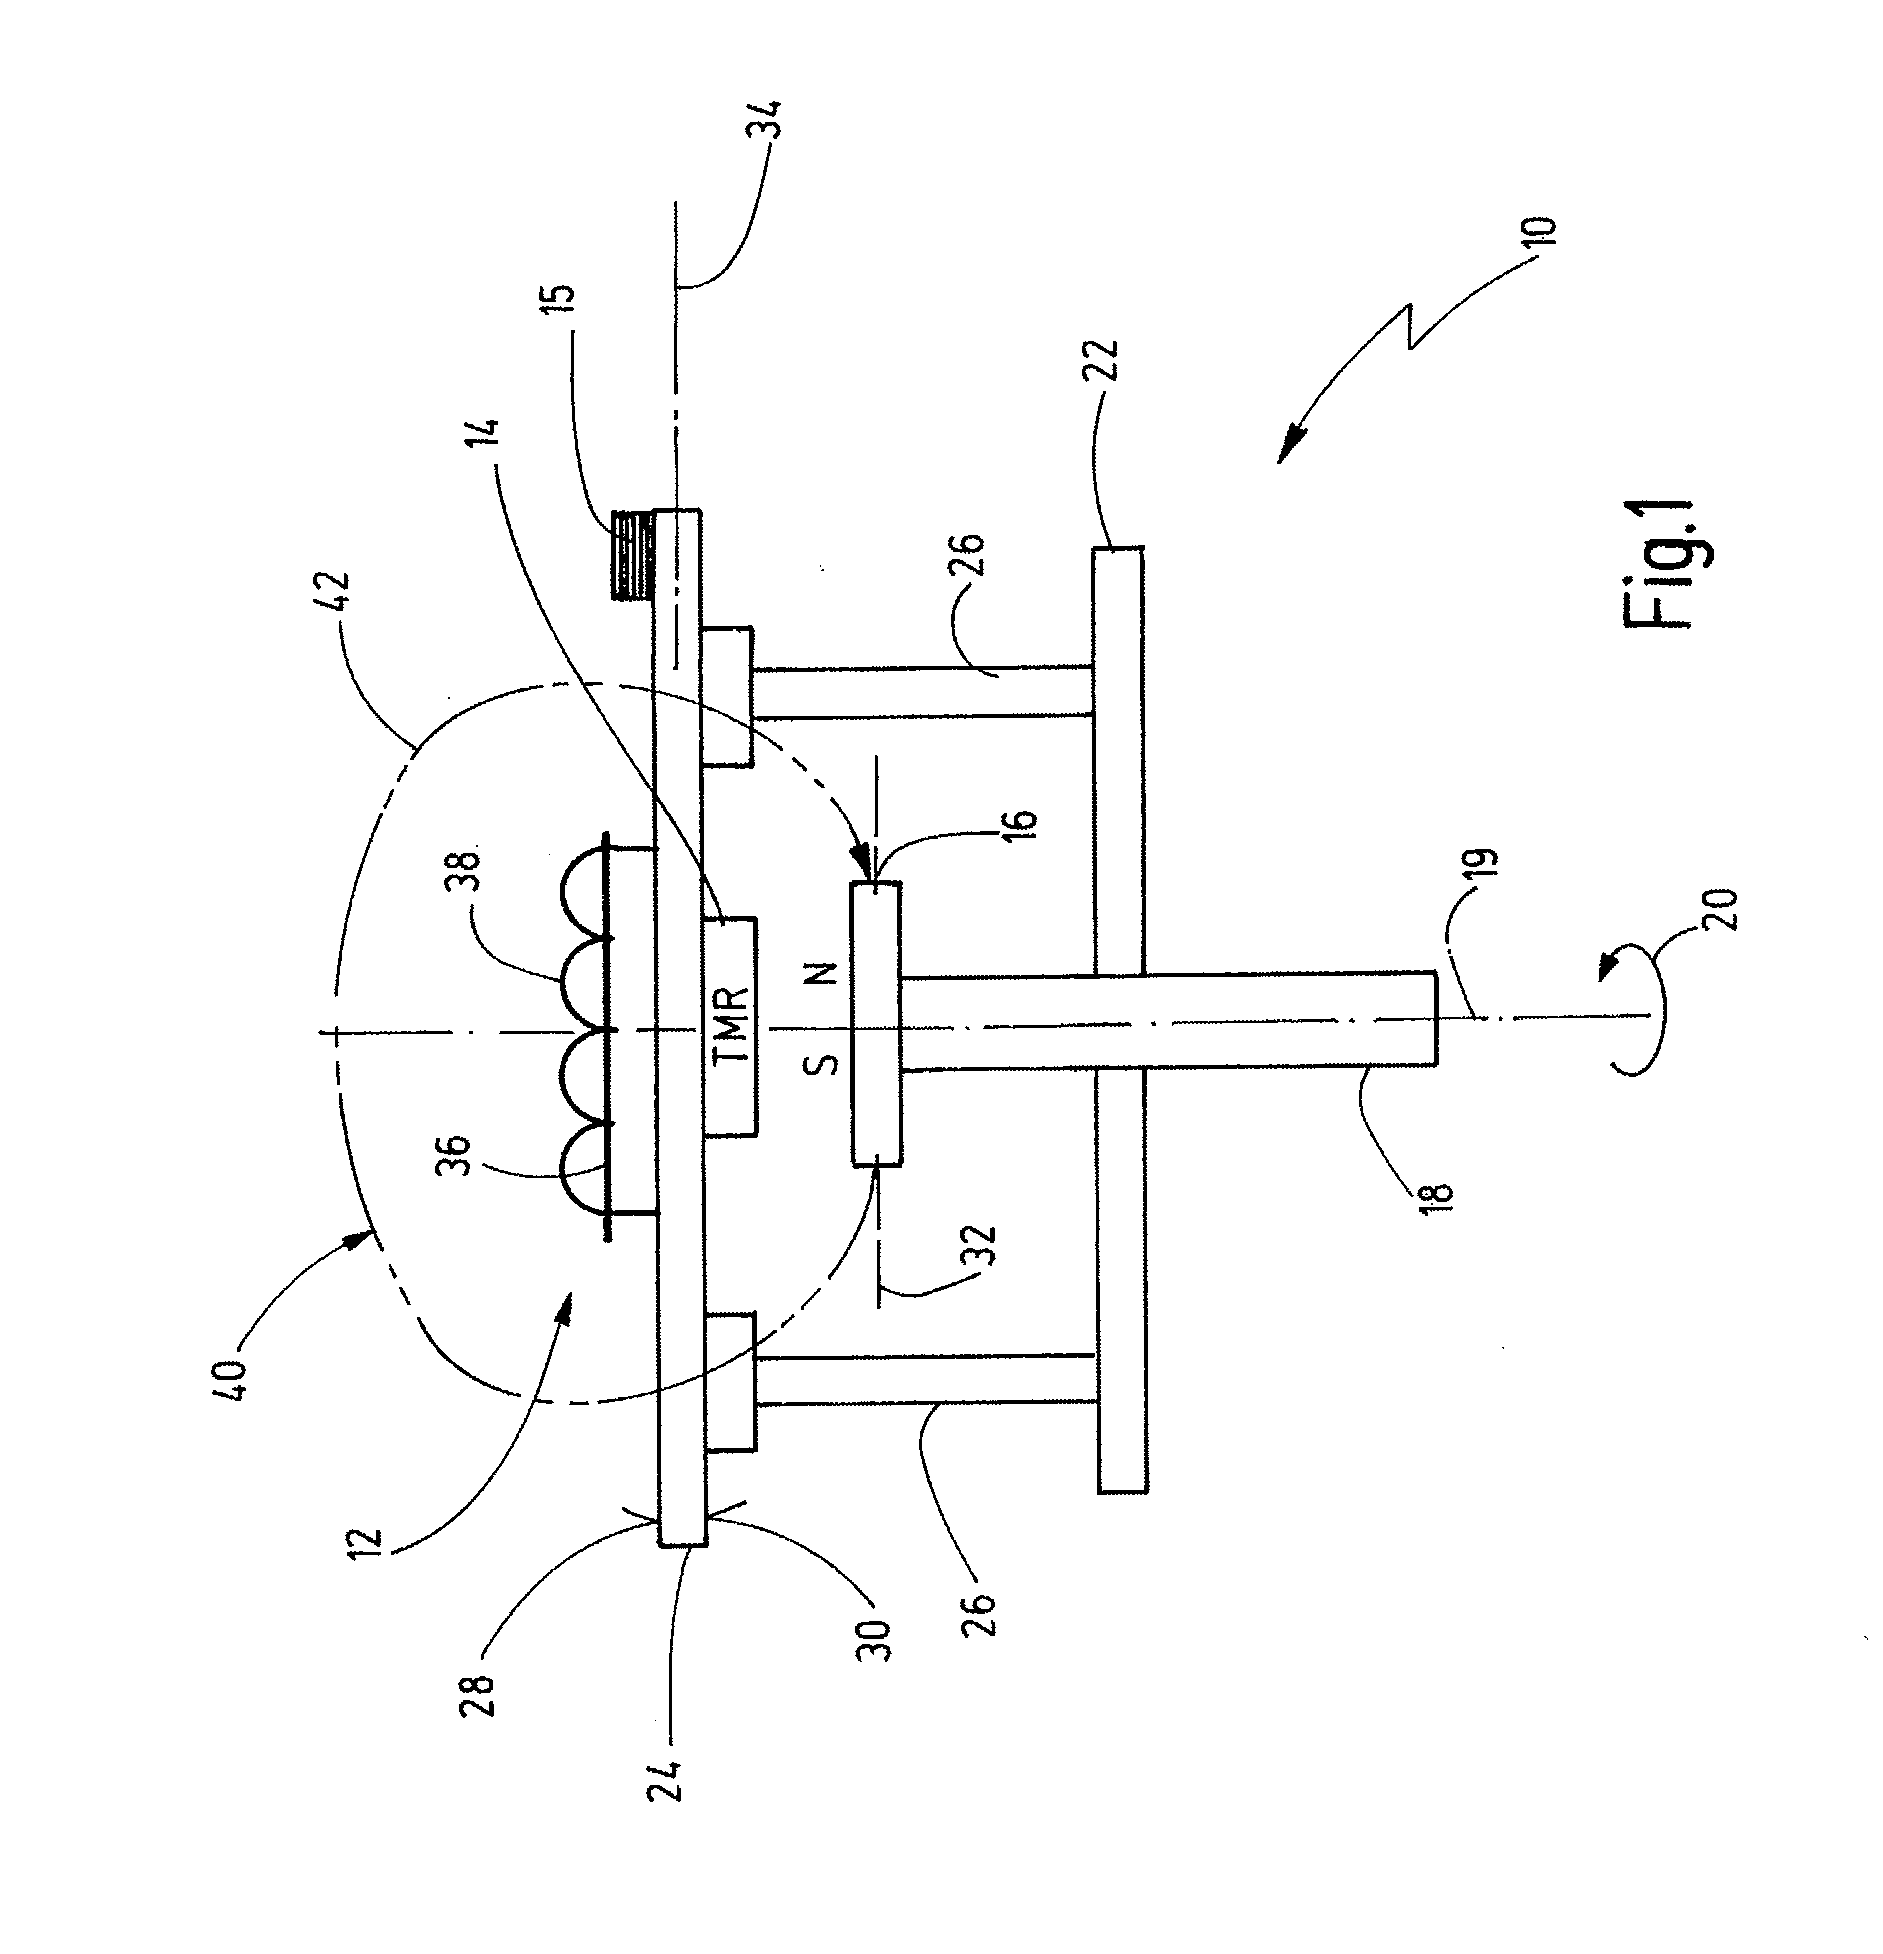 Energy-self-sufficient multiturn rotary encoder and method for determining a unique position of an encoder shaft by means of the multiturn rotary encoder